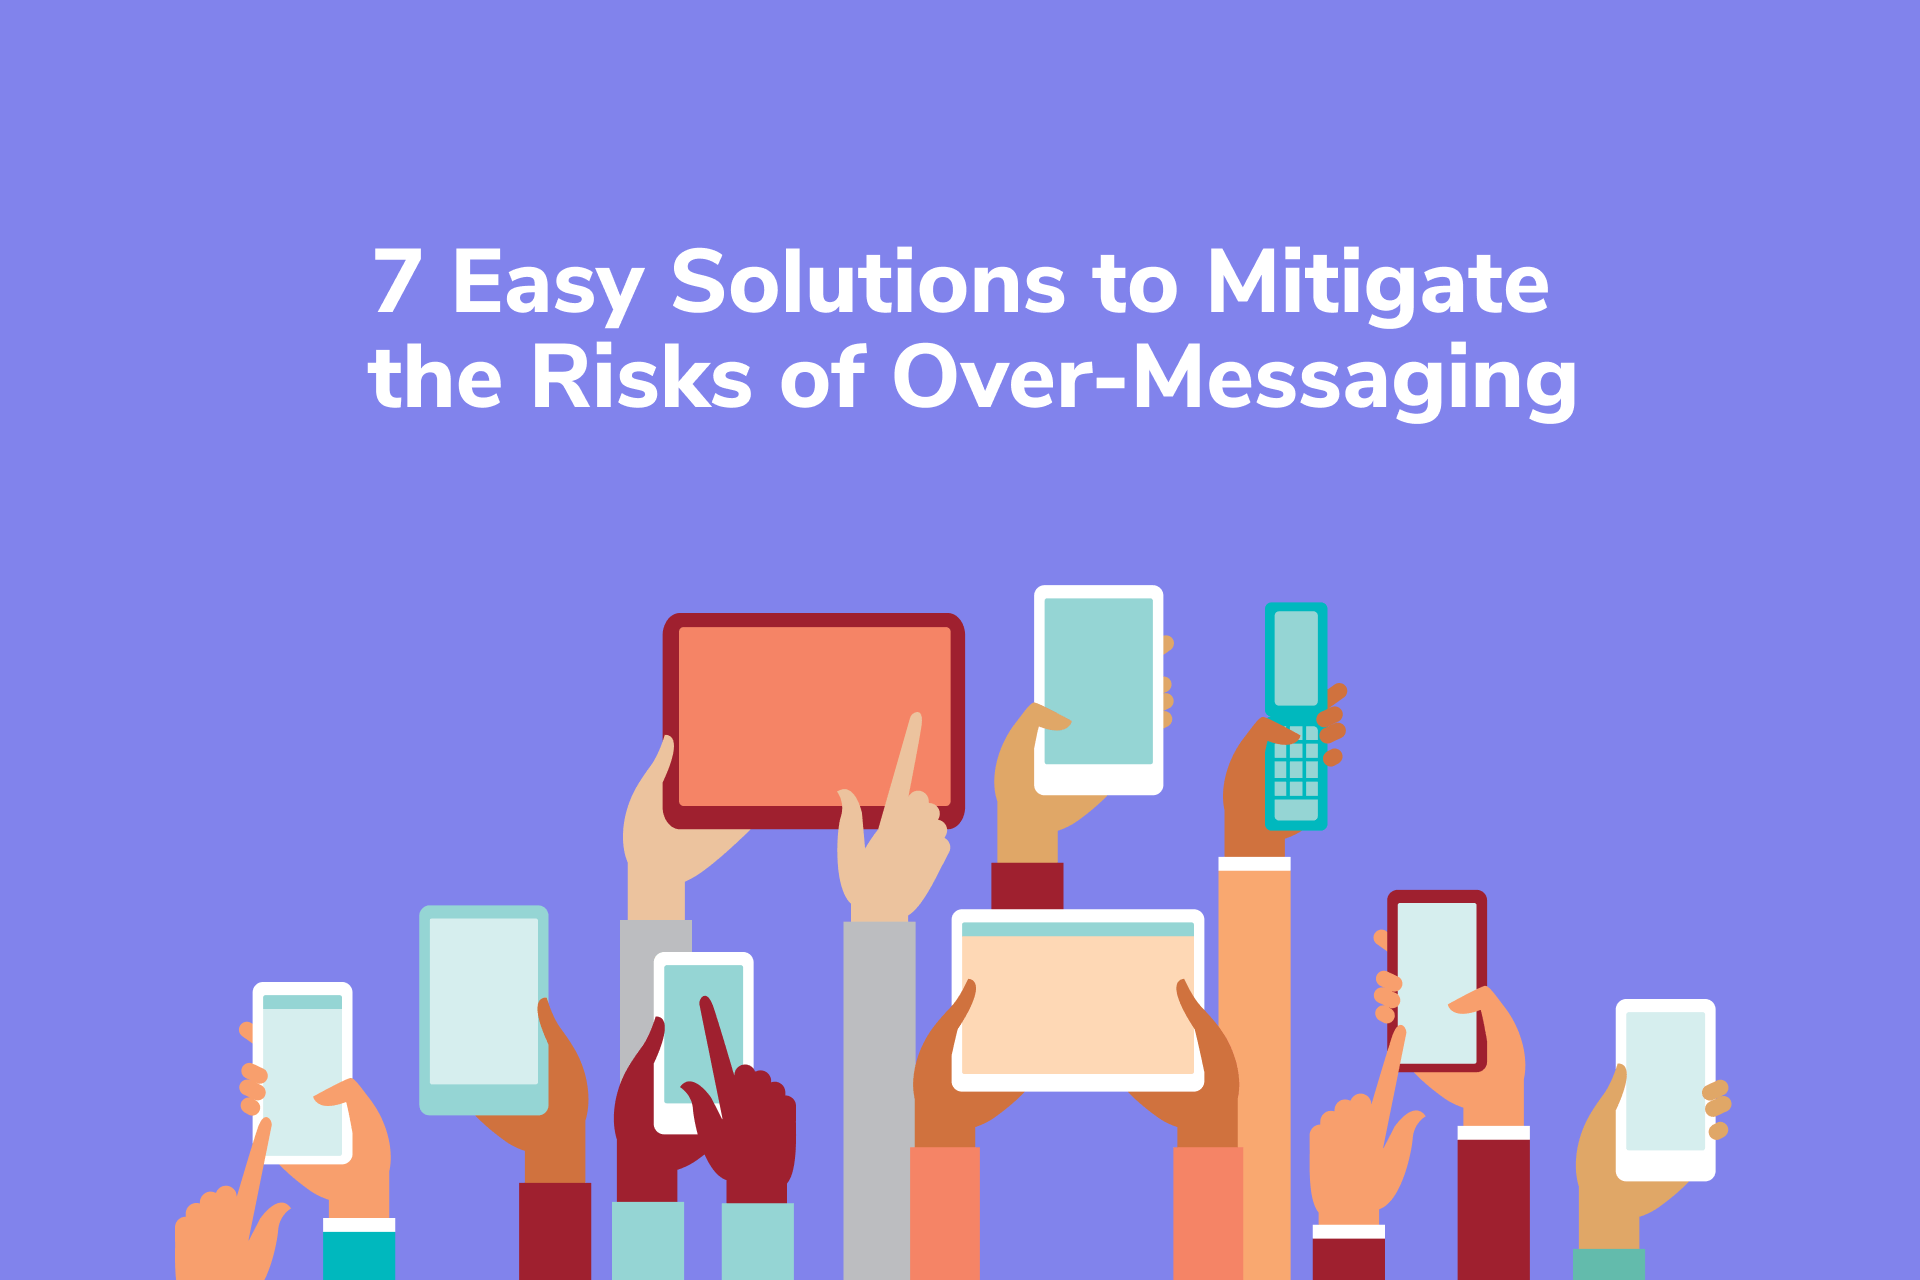 7 Easy Solutions to Mitigate the Risks of Over-Messaging